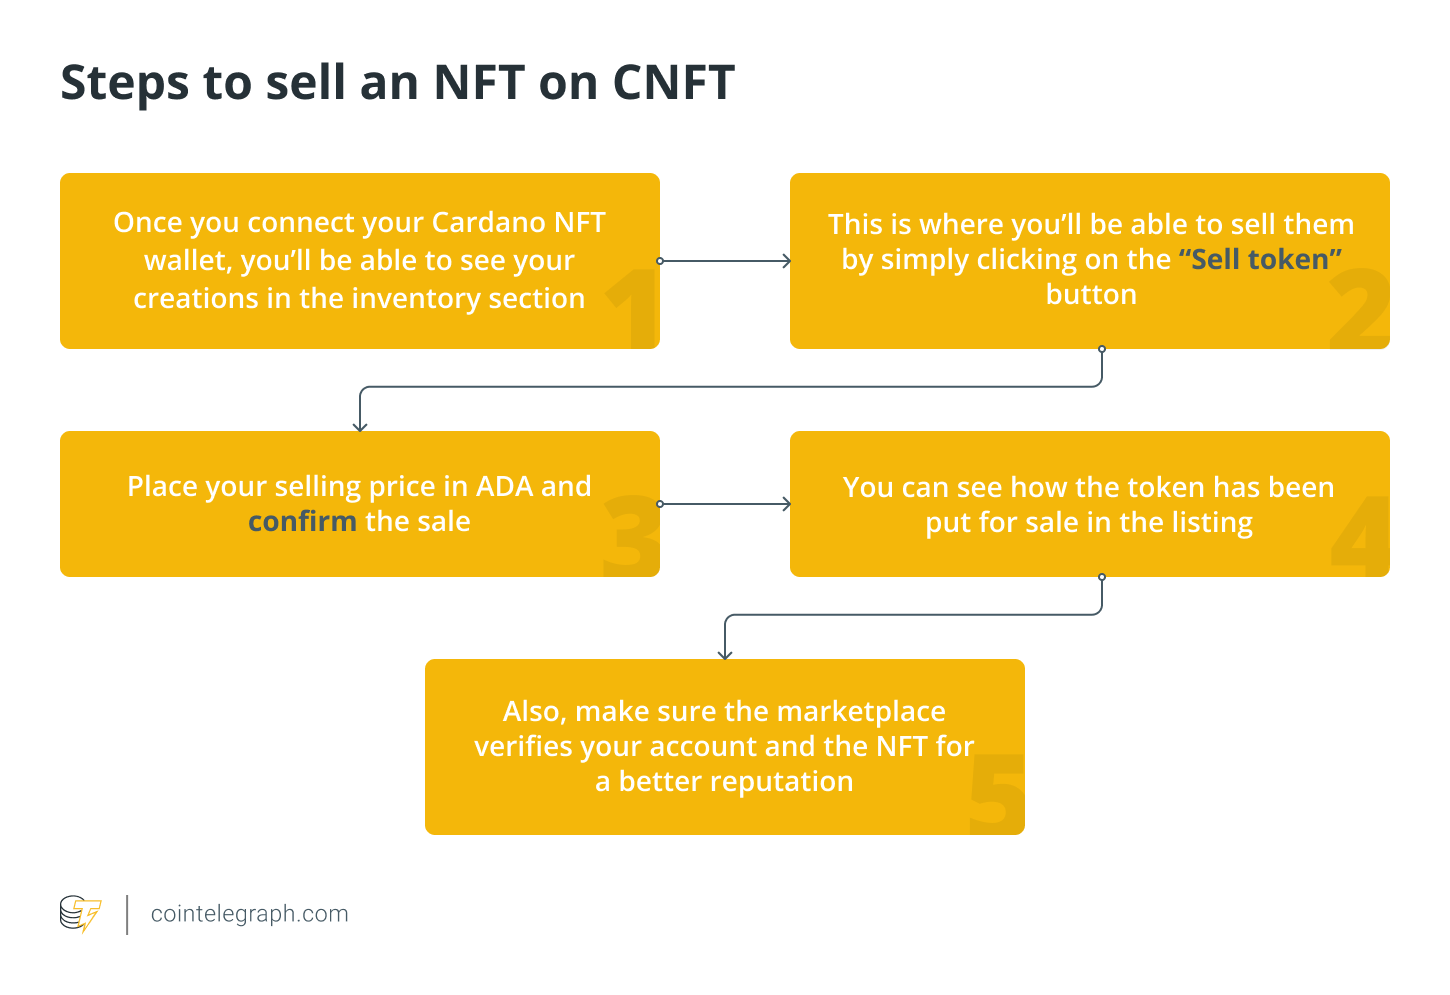 Steps to sell an NFT on CNFT